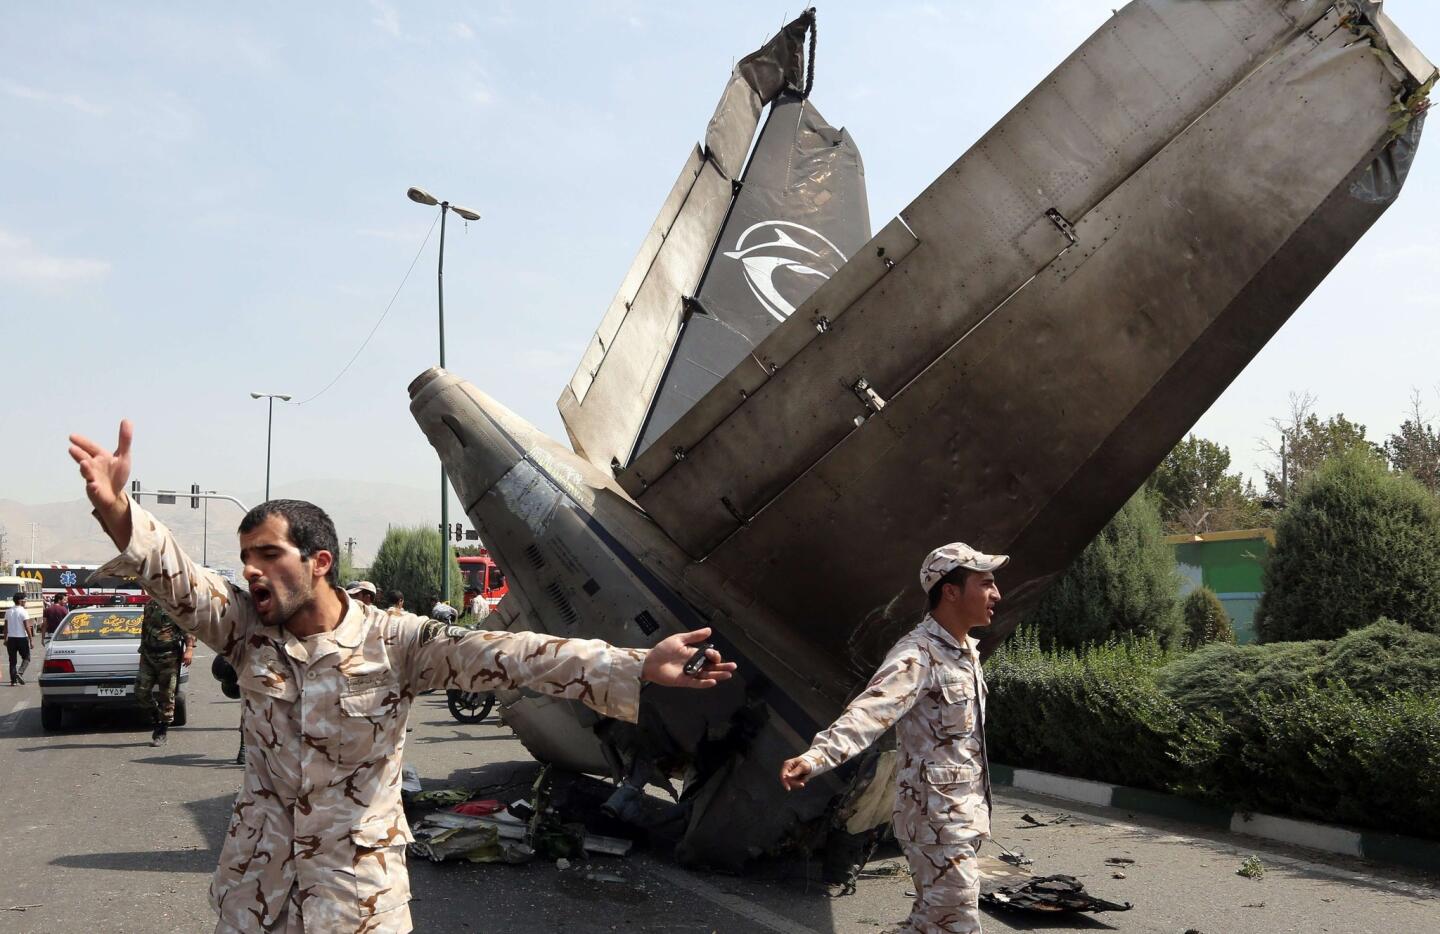 Iranian forces secure the scene of a plane crash near Tehran's Mehrabad Airport.